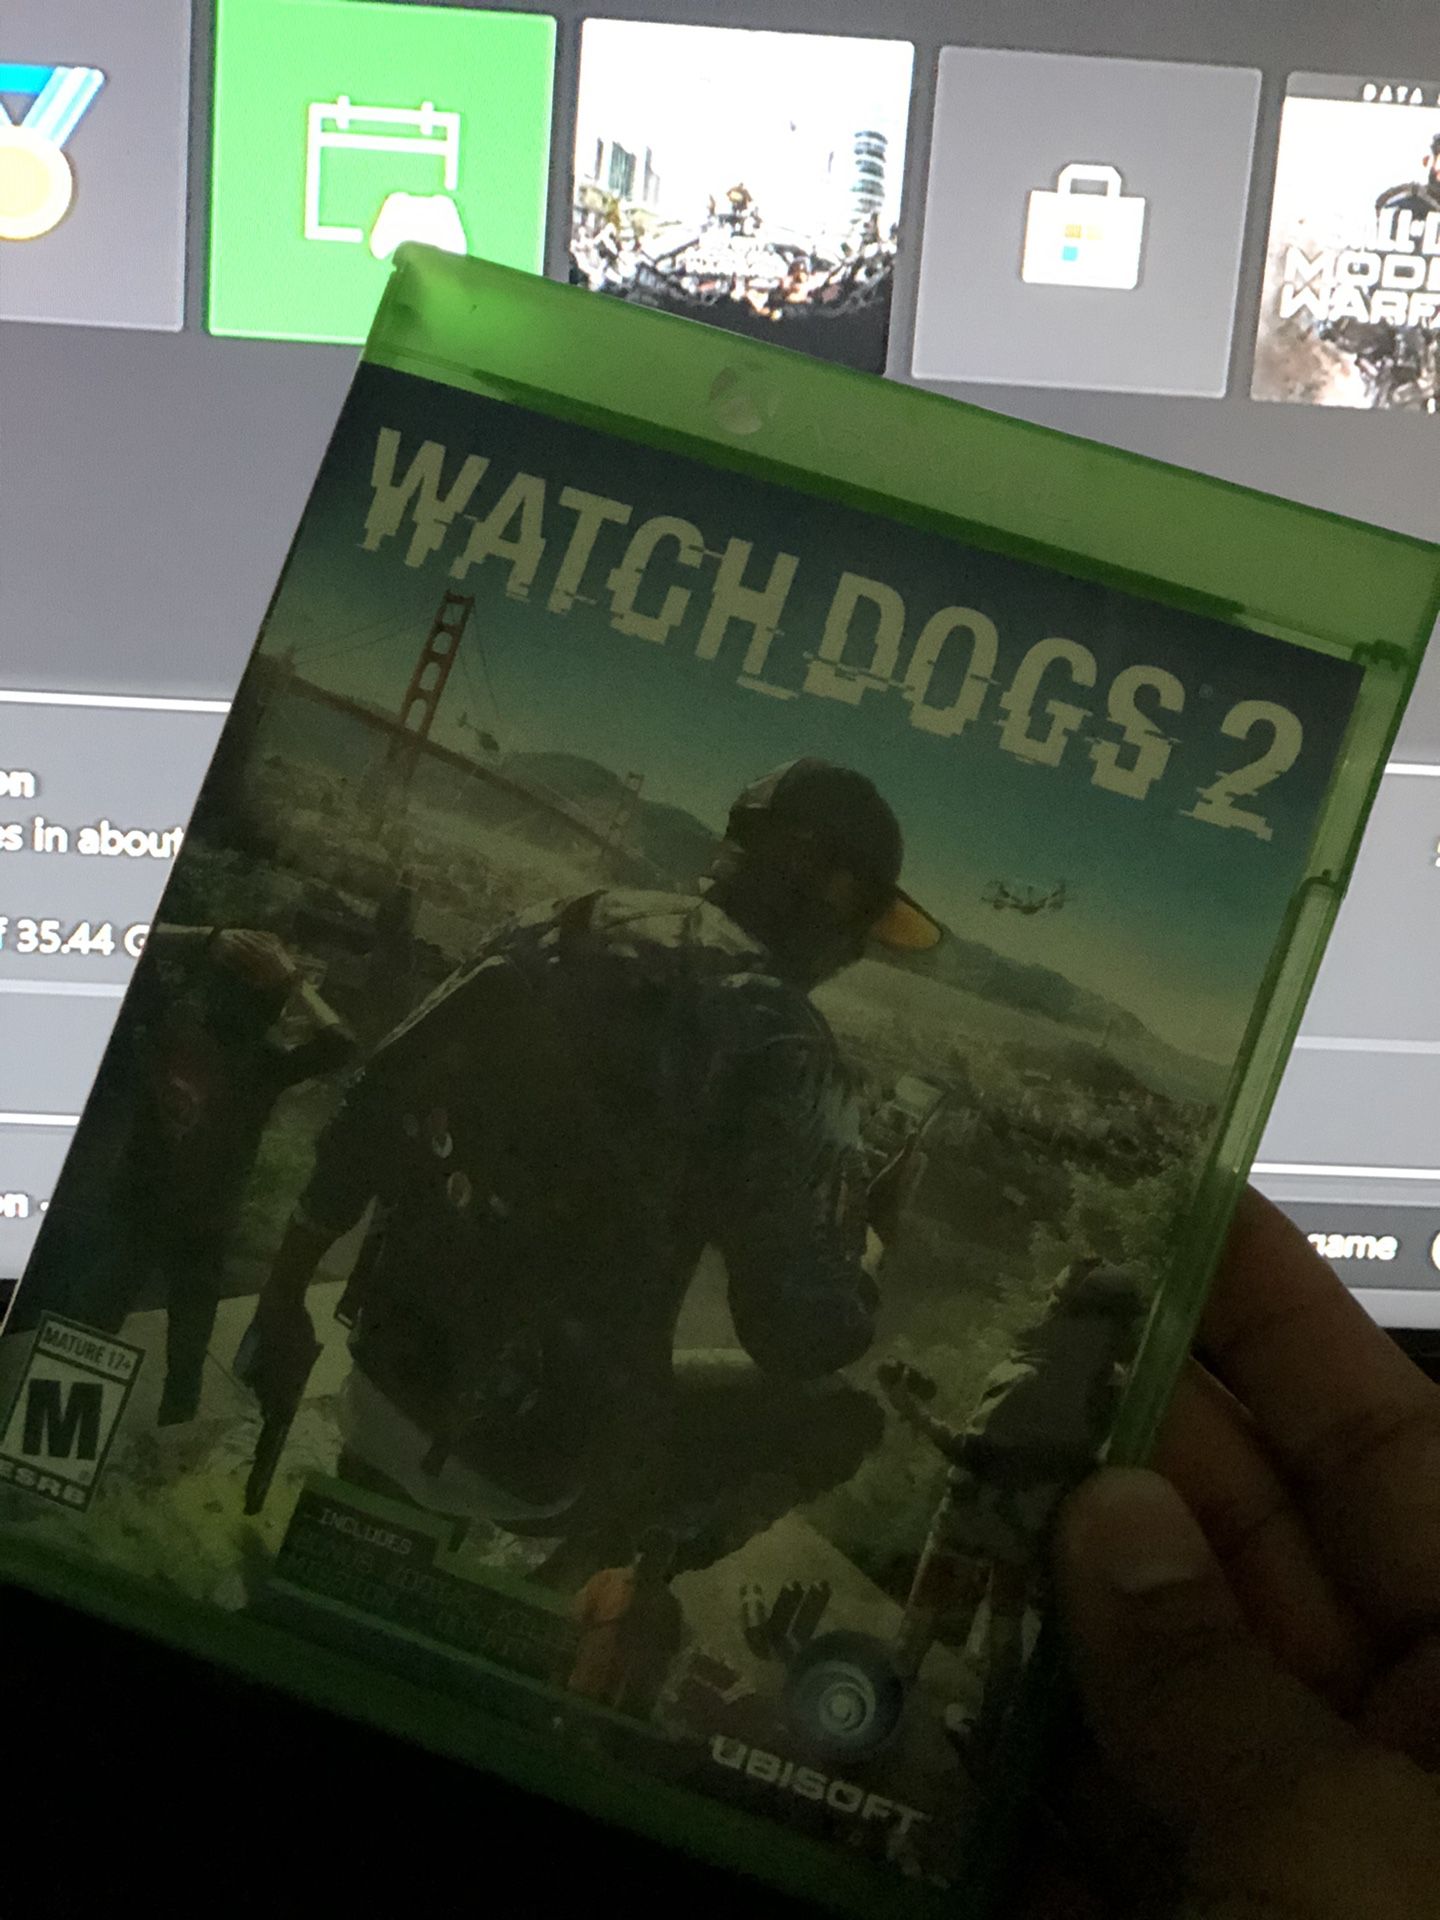 Watch dogs 2 for Xbox one